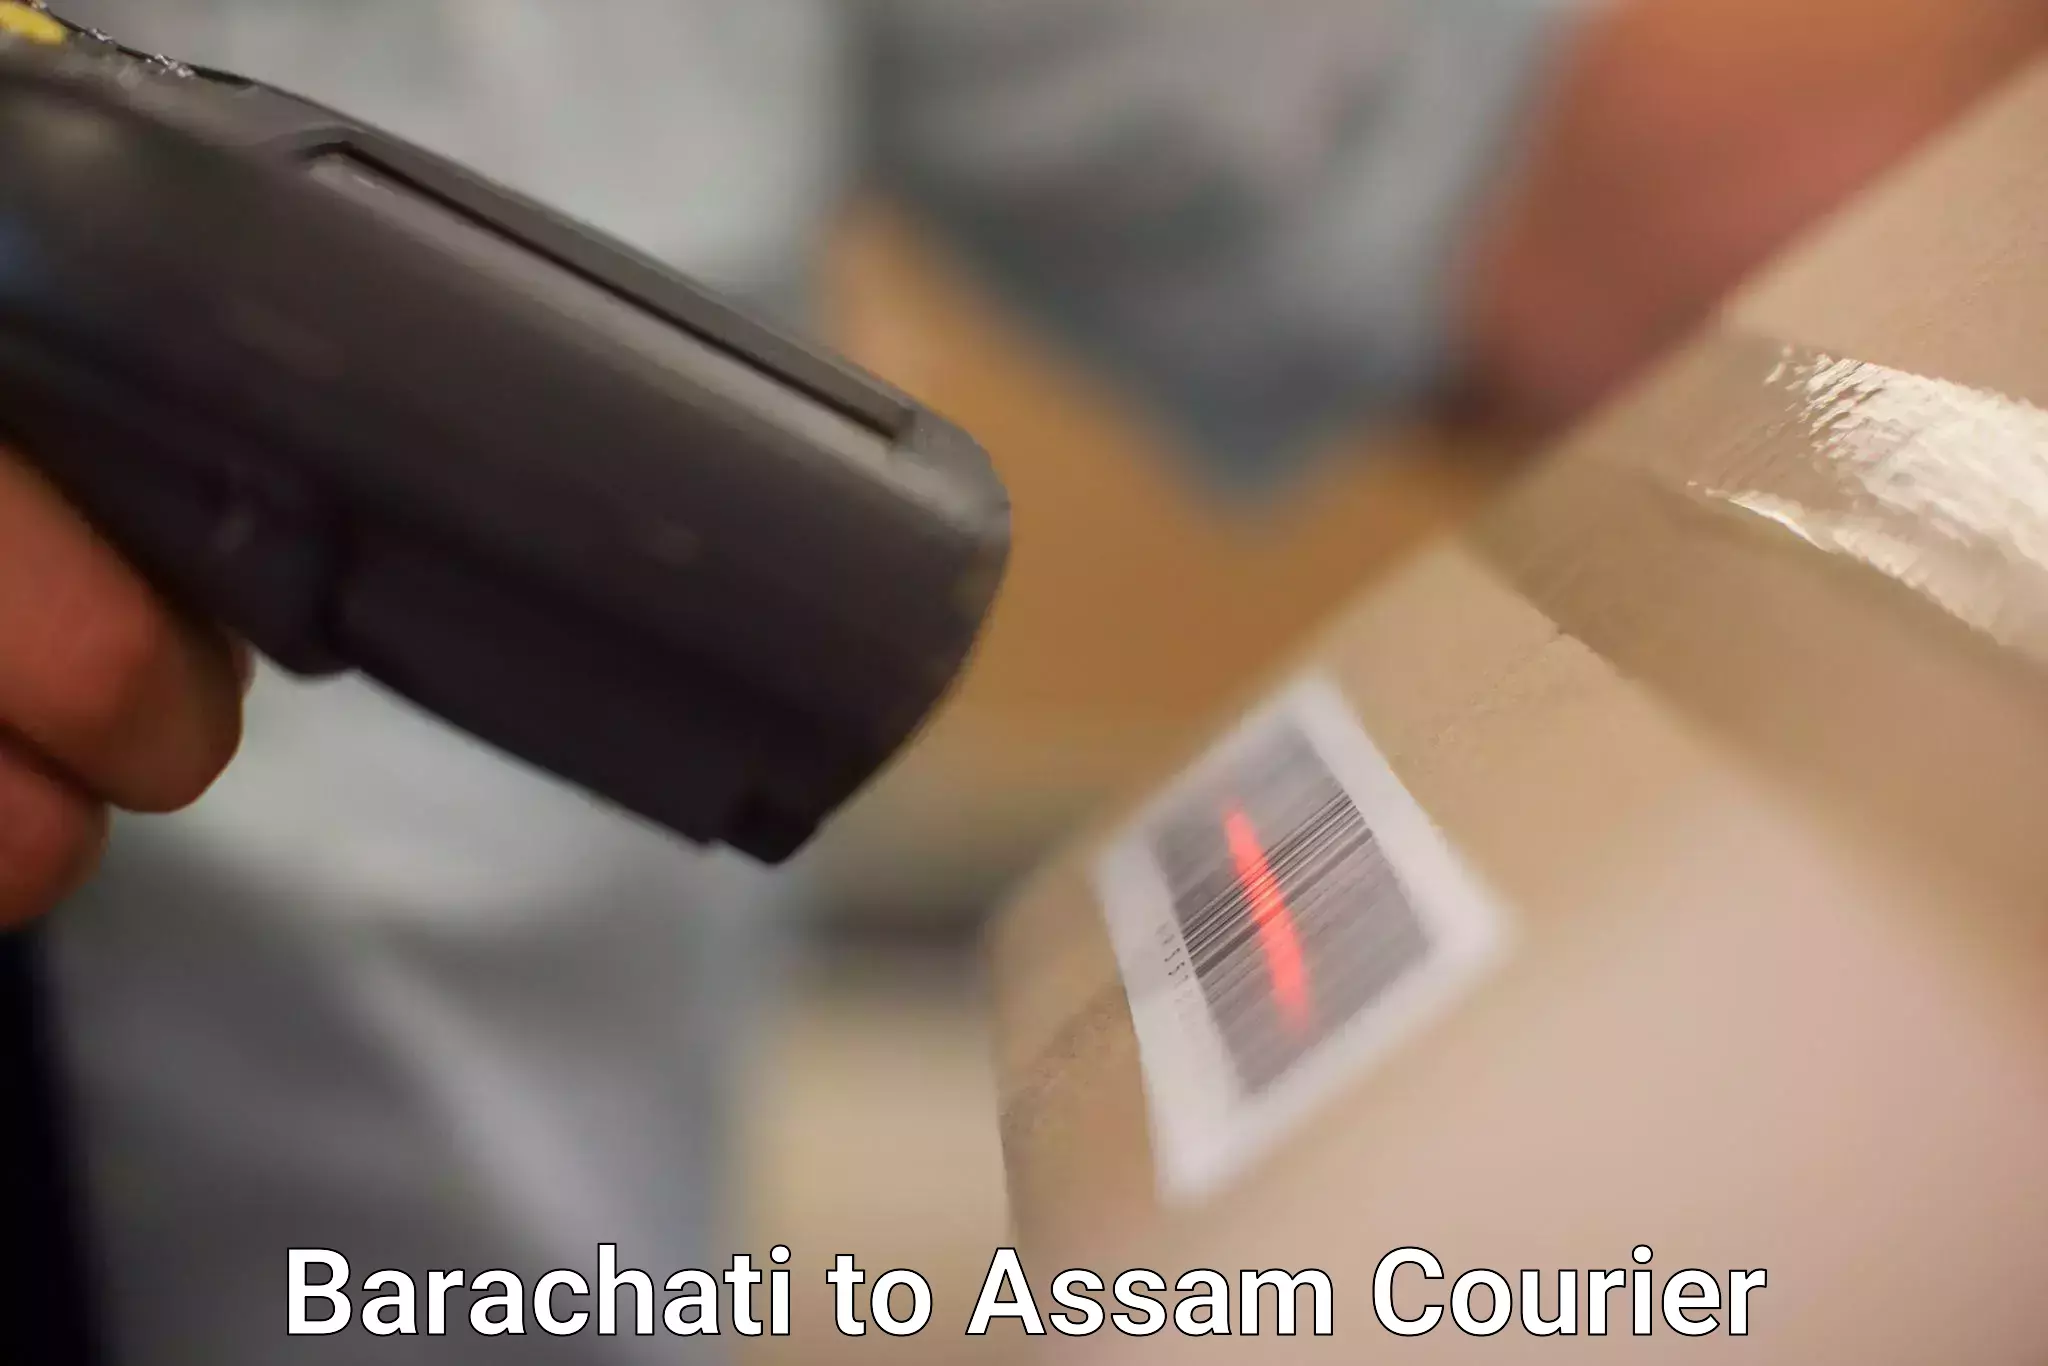 24/7 courier service Barachati to Assam